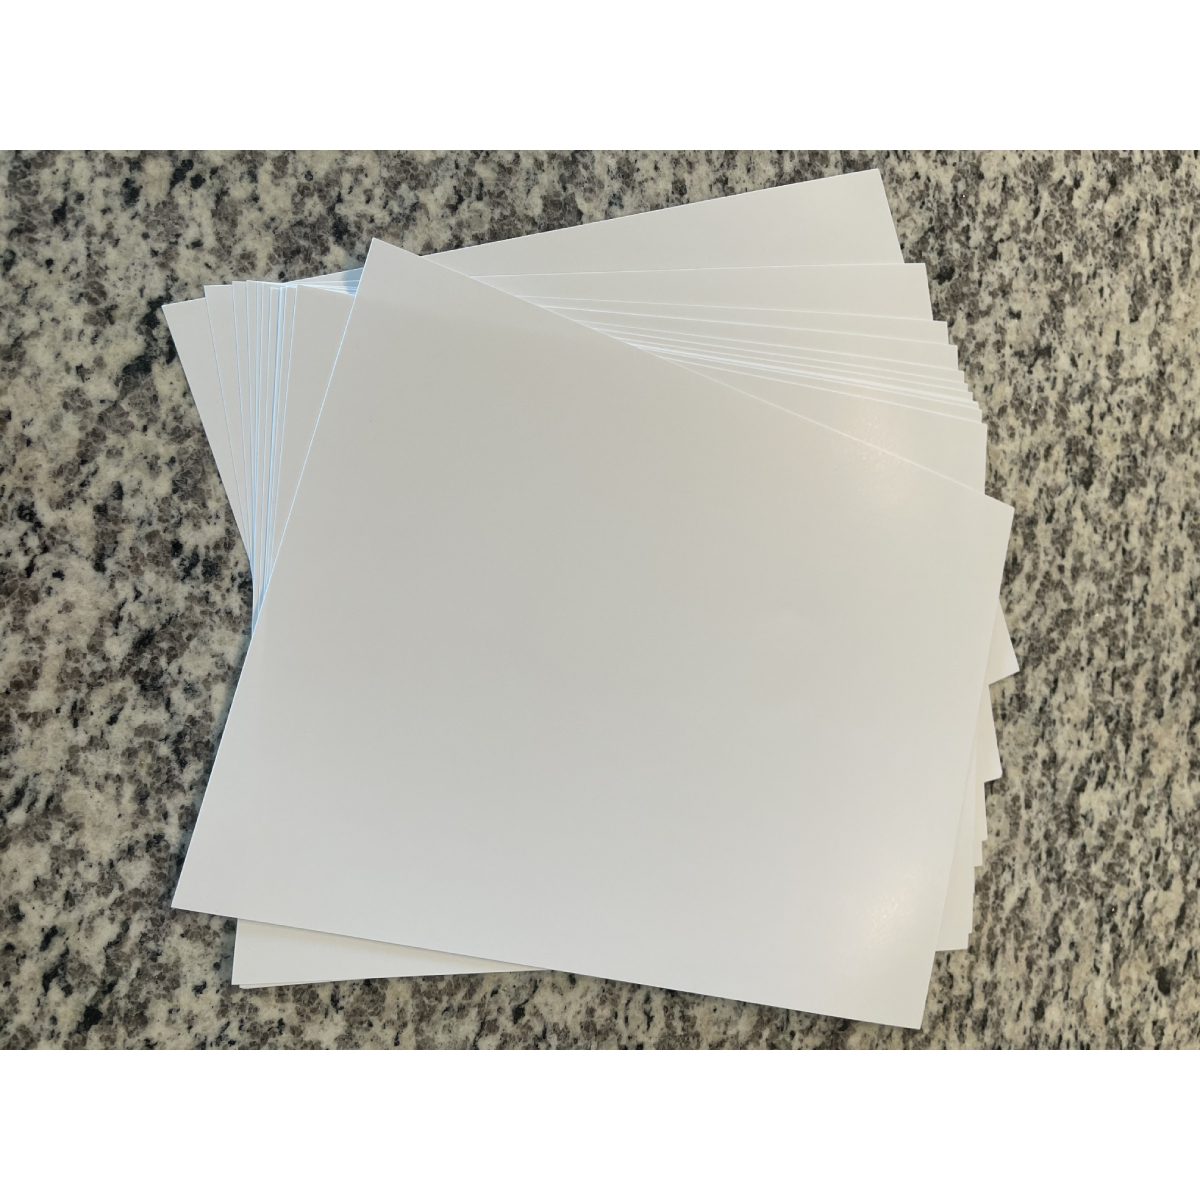 Cricut 8.5 x 11 White Printable Sticker Papers 12ct